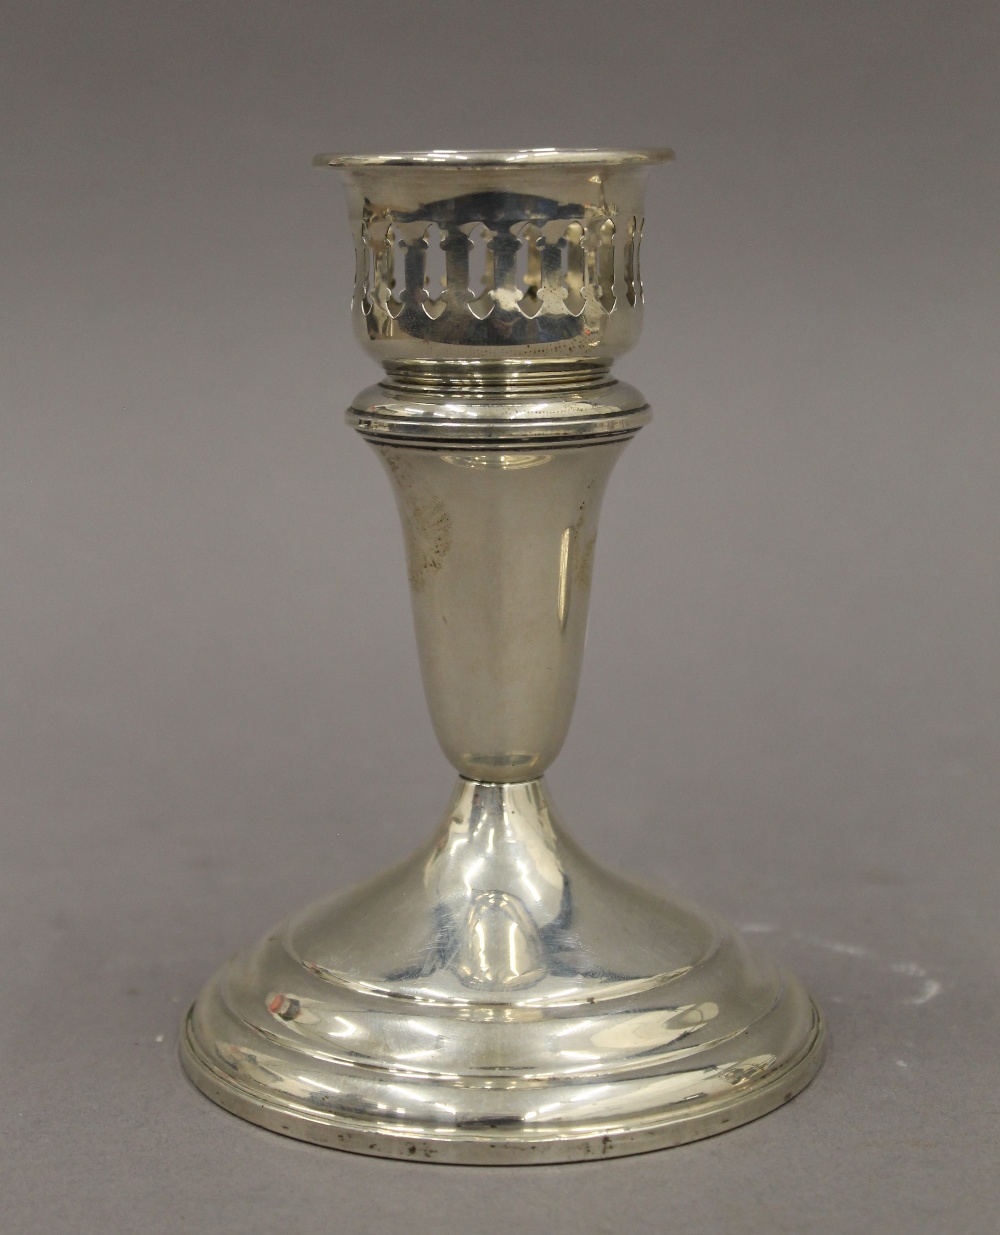 A pair of sterling silver candlesticks with detachable sconces. 13 cm high. 23.4 troy ounces loaded. - Image 3 of 4